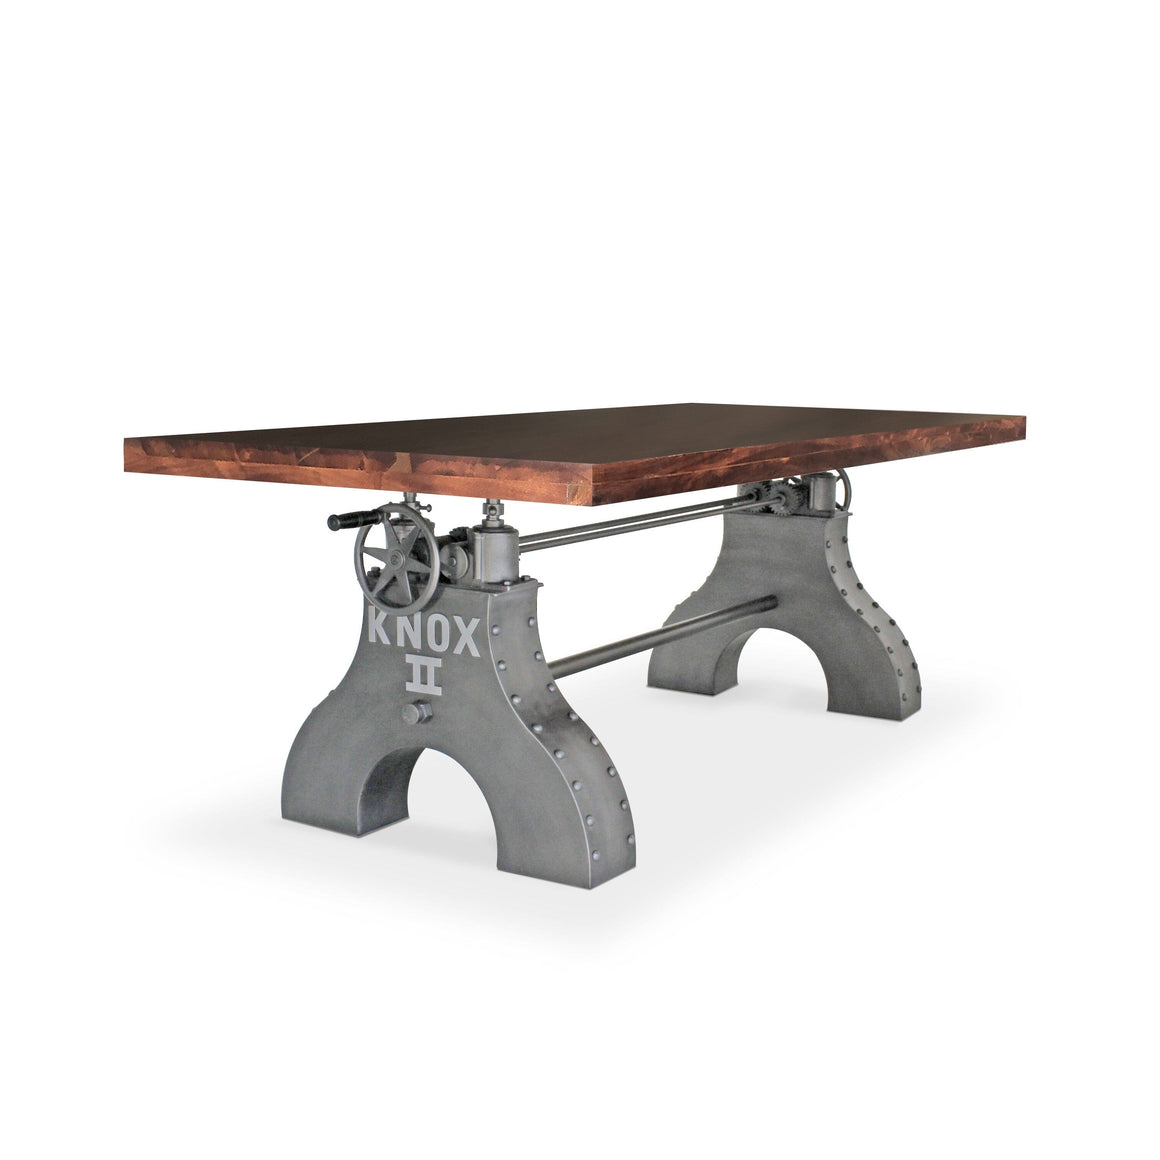 KNOX II Adjustable Dining Table - Embossed Cast Iron Base - Mahogany Dining Table Rustic Deco